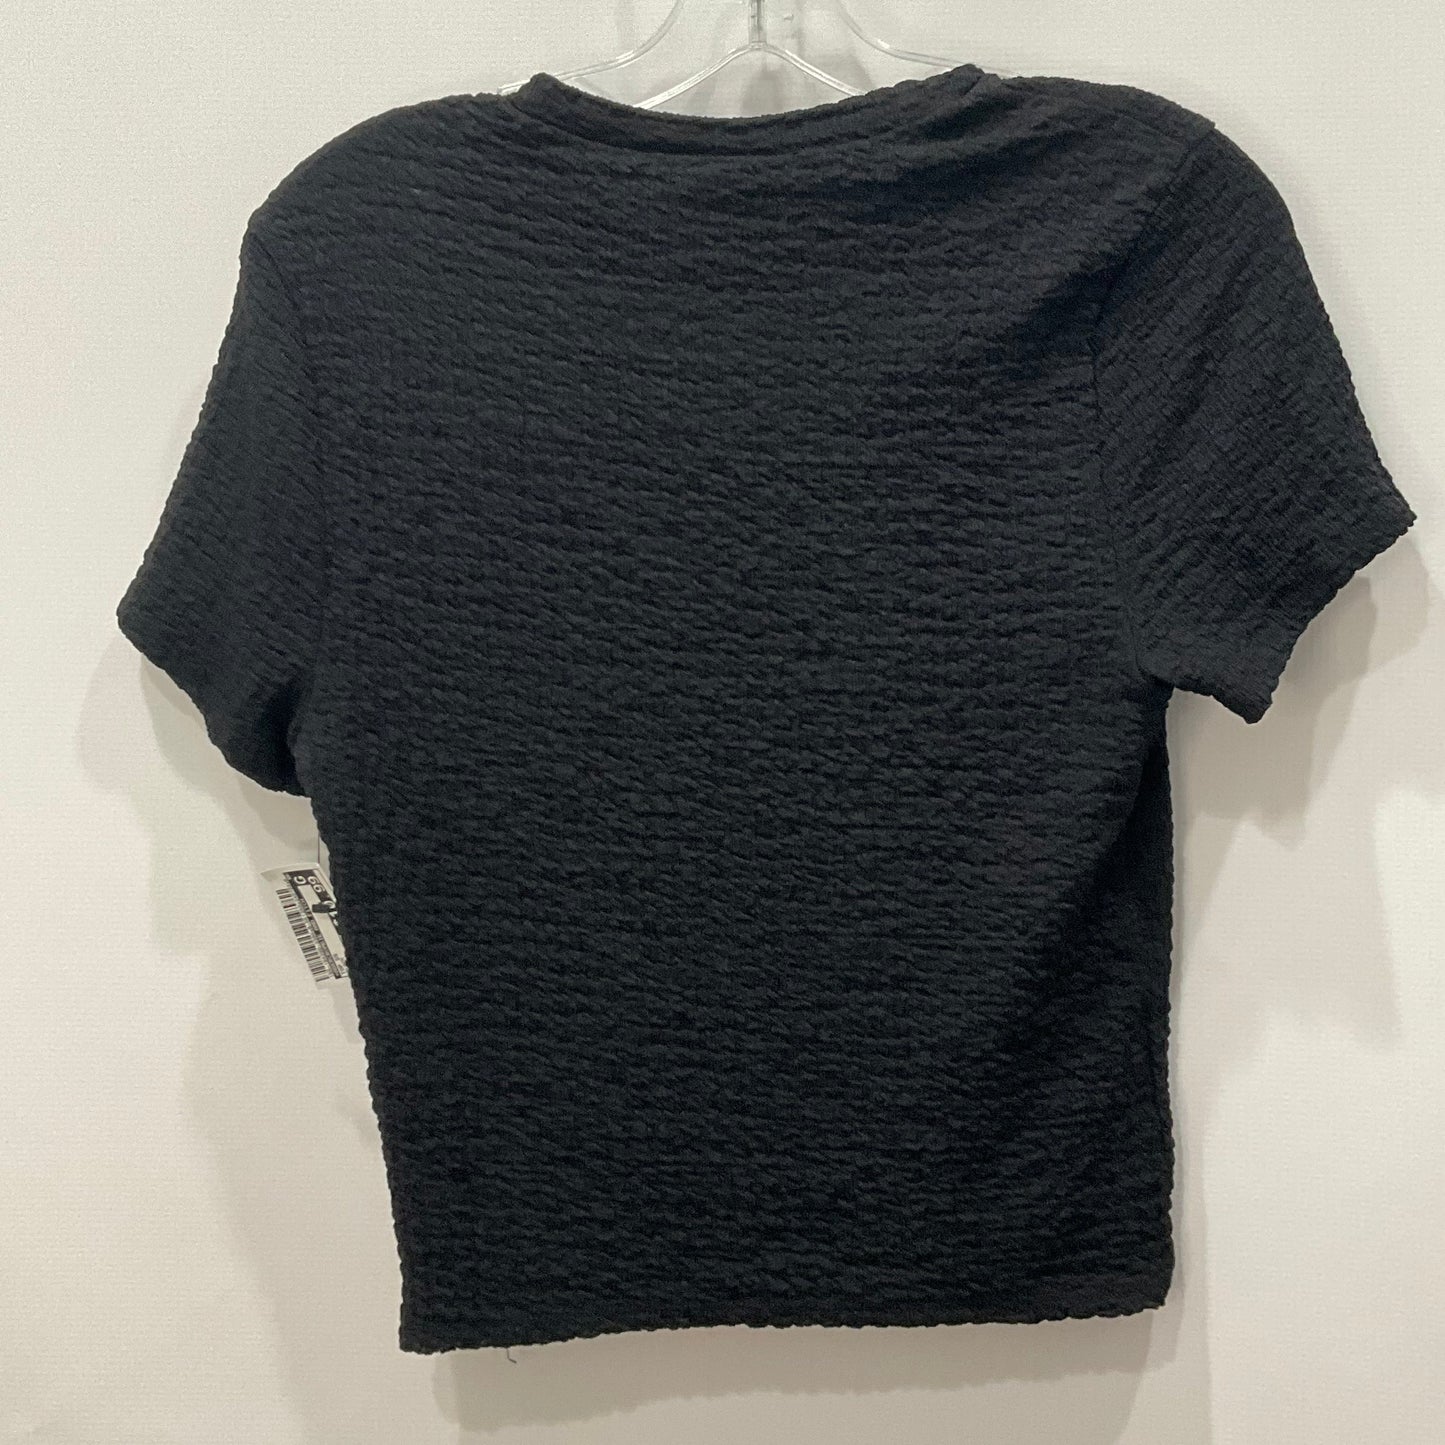 Black Top Short Sleeve Abercrombie And Fitch, Size M